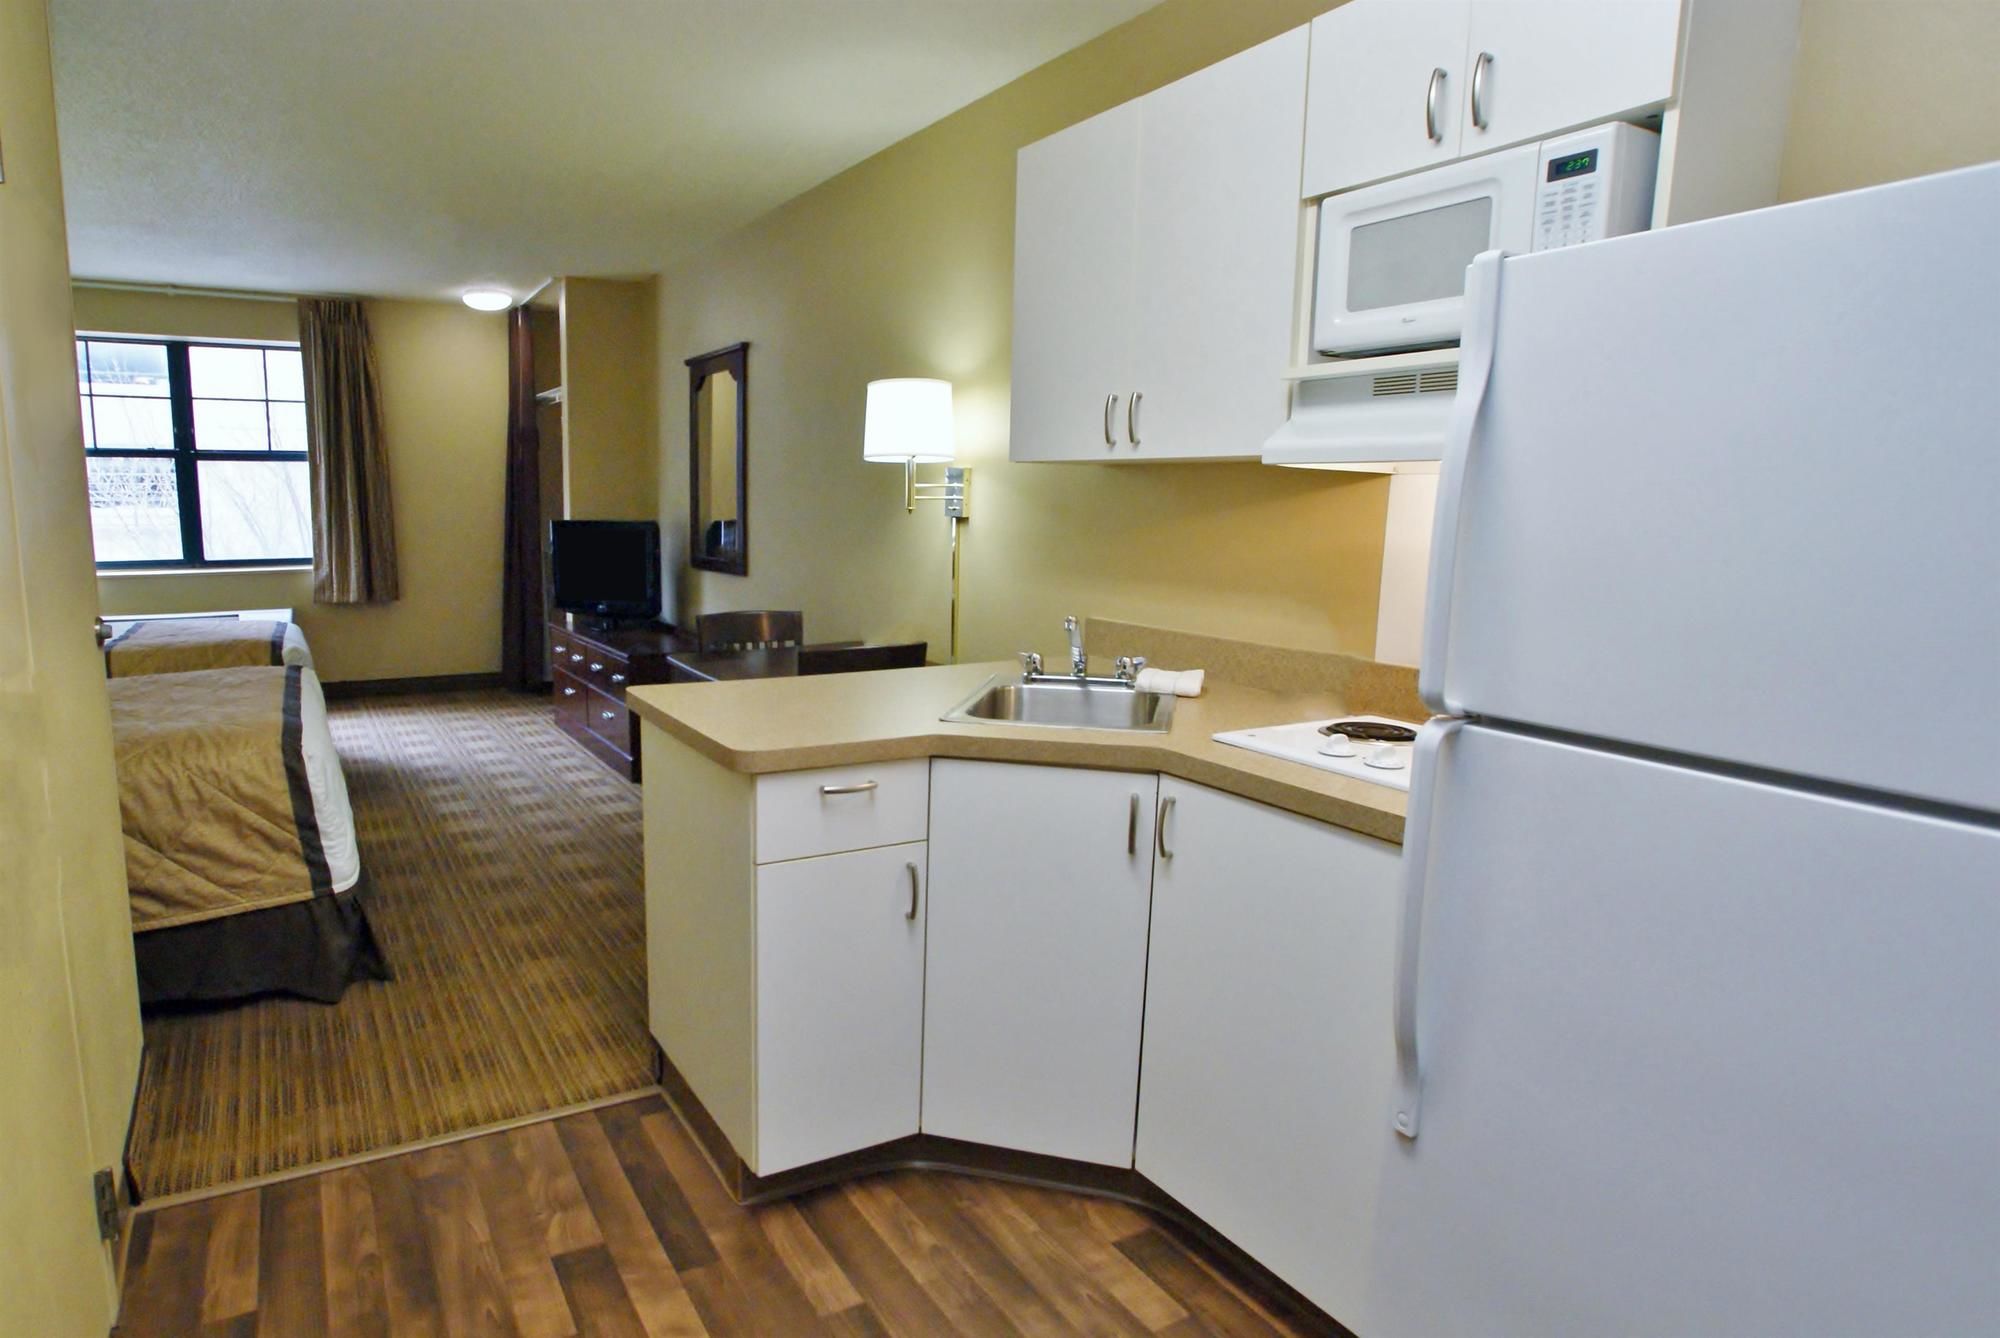 Extended Stay America Fishkill Westage Center